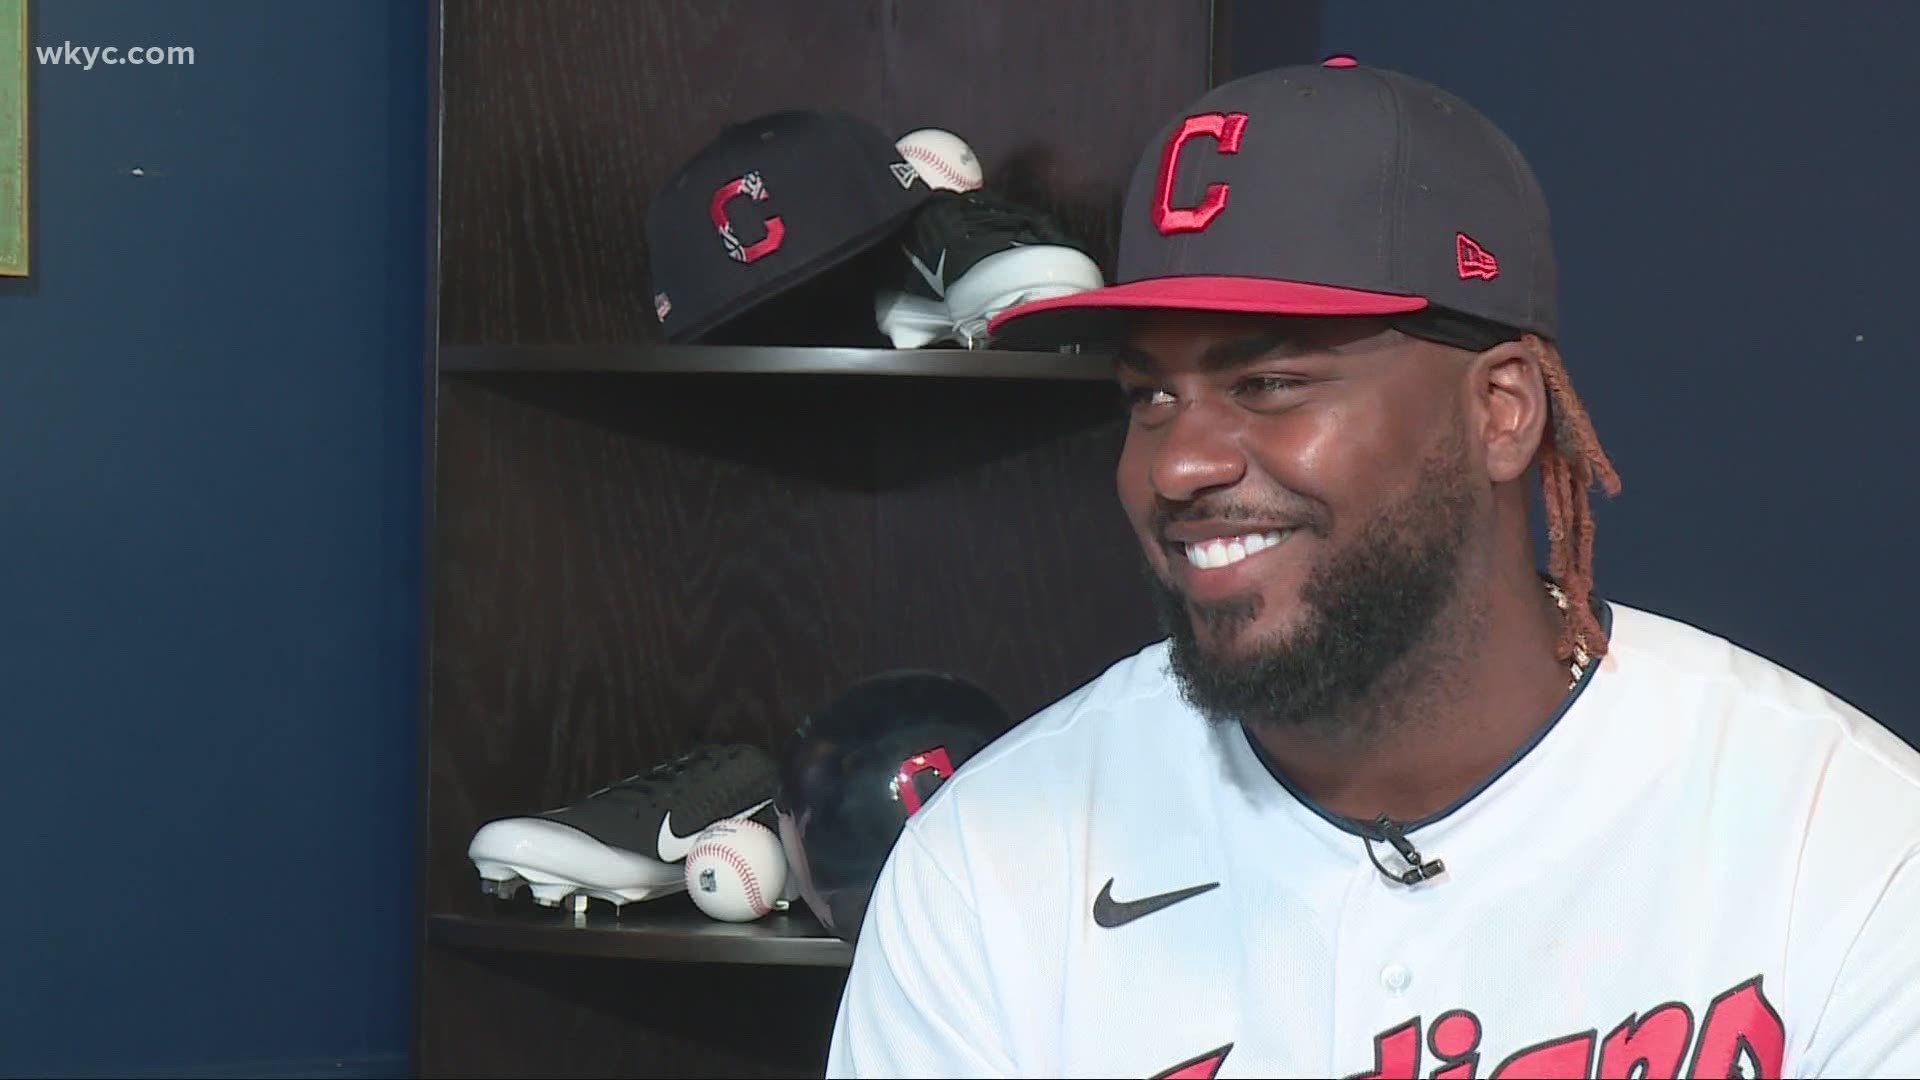 Get to know more about Cleveland Indians right fielder Franmil Reyes as 3News' Dave Chudowsky goes 'Beyond the Dugout' for an exclusive interview.